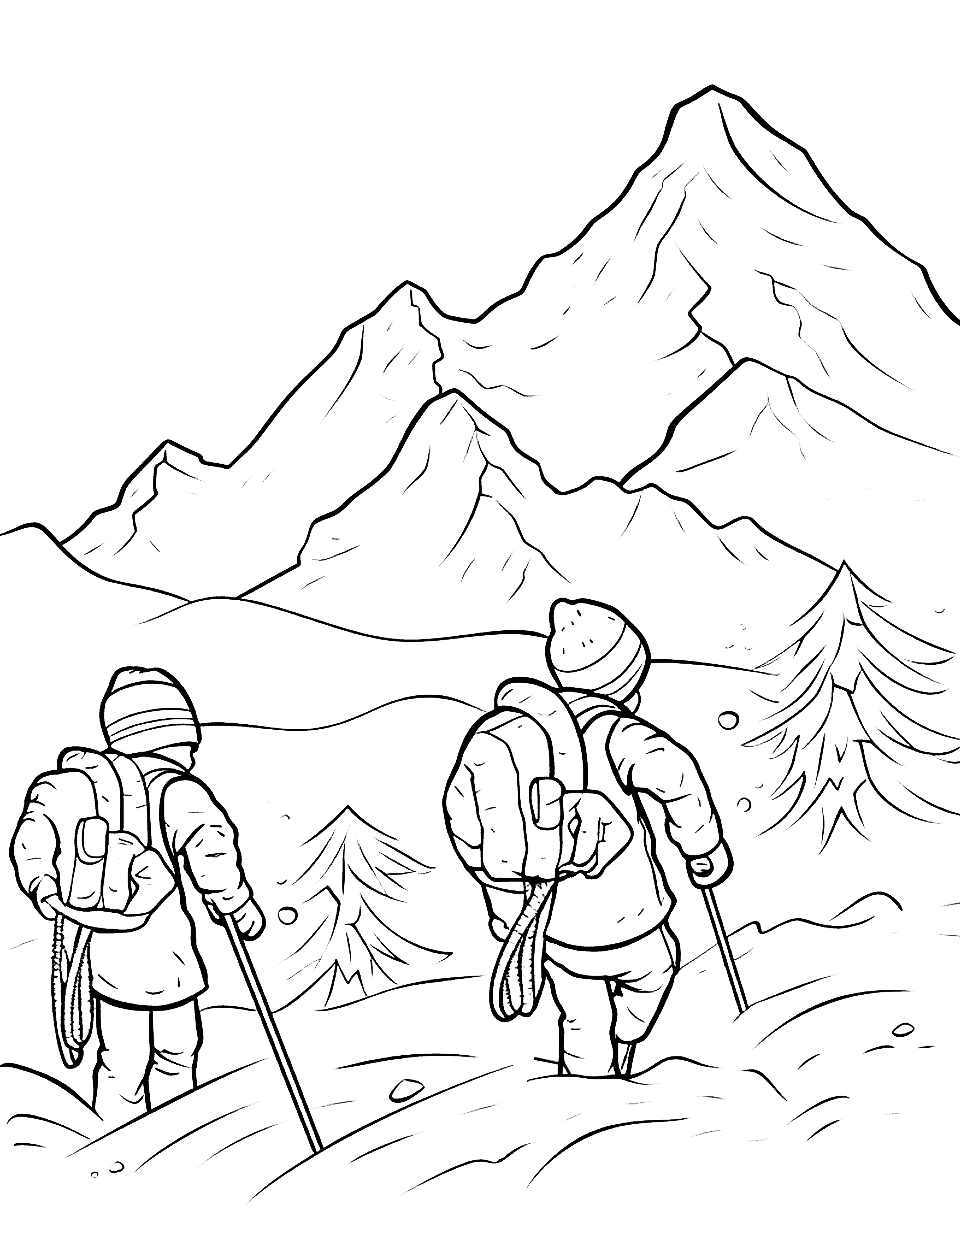 Snowy Mountain Adventure Christmas Coloring Page - A group of friends walking down a snowy mountain.